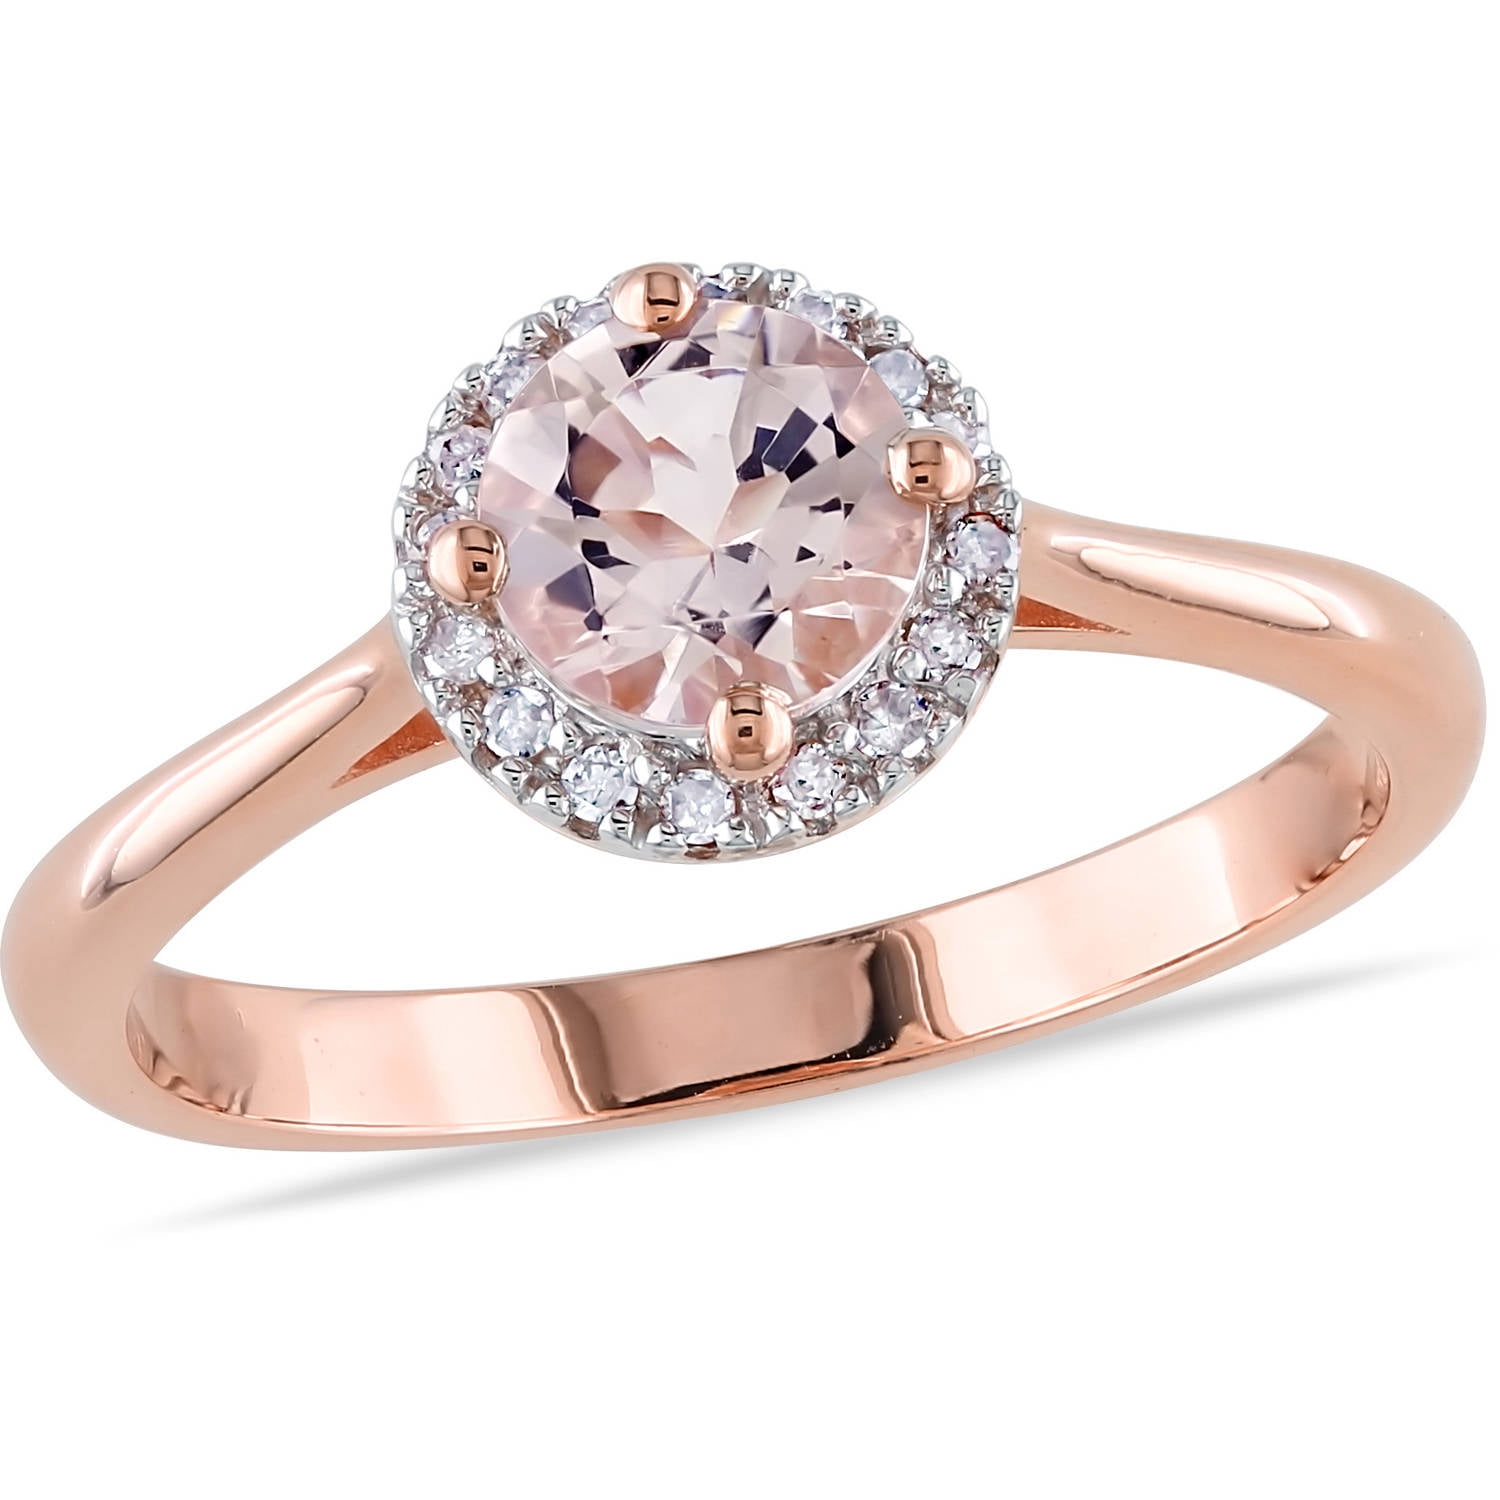 Natural Morganite Solitaire Engagement Ring in Rose Gold Plated Sterling Silver Morganite Engagement Ring Morganite Halo Ring